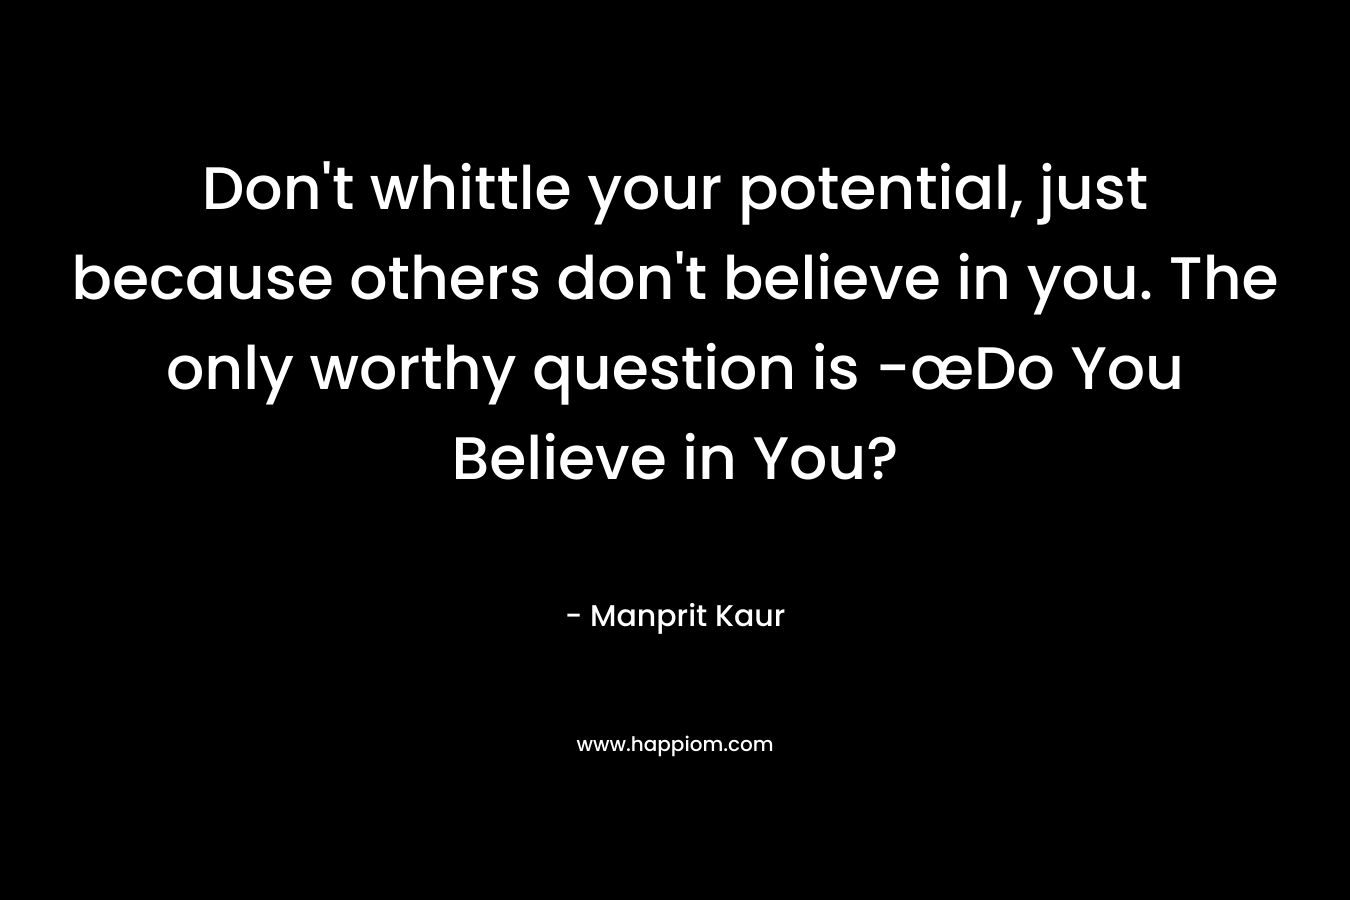 Don’t whittle your potential, just because others don’t believe in you. The only worthy question is -œDo You Believe in You? – Manprit Kaur